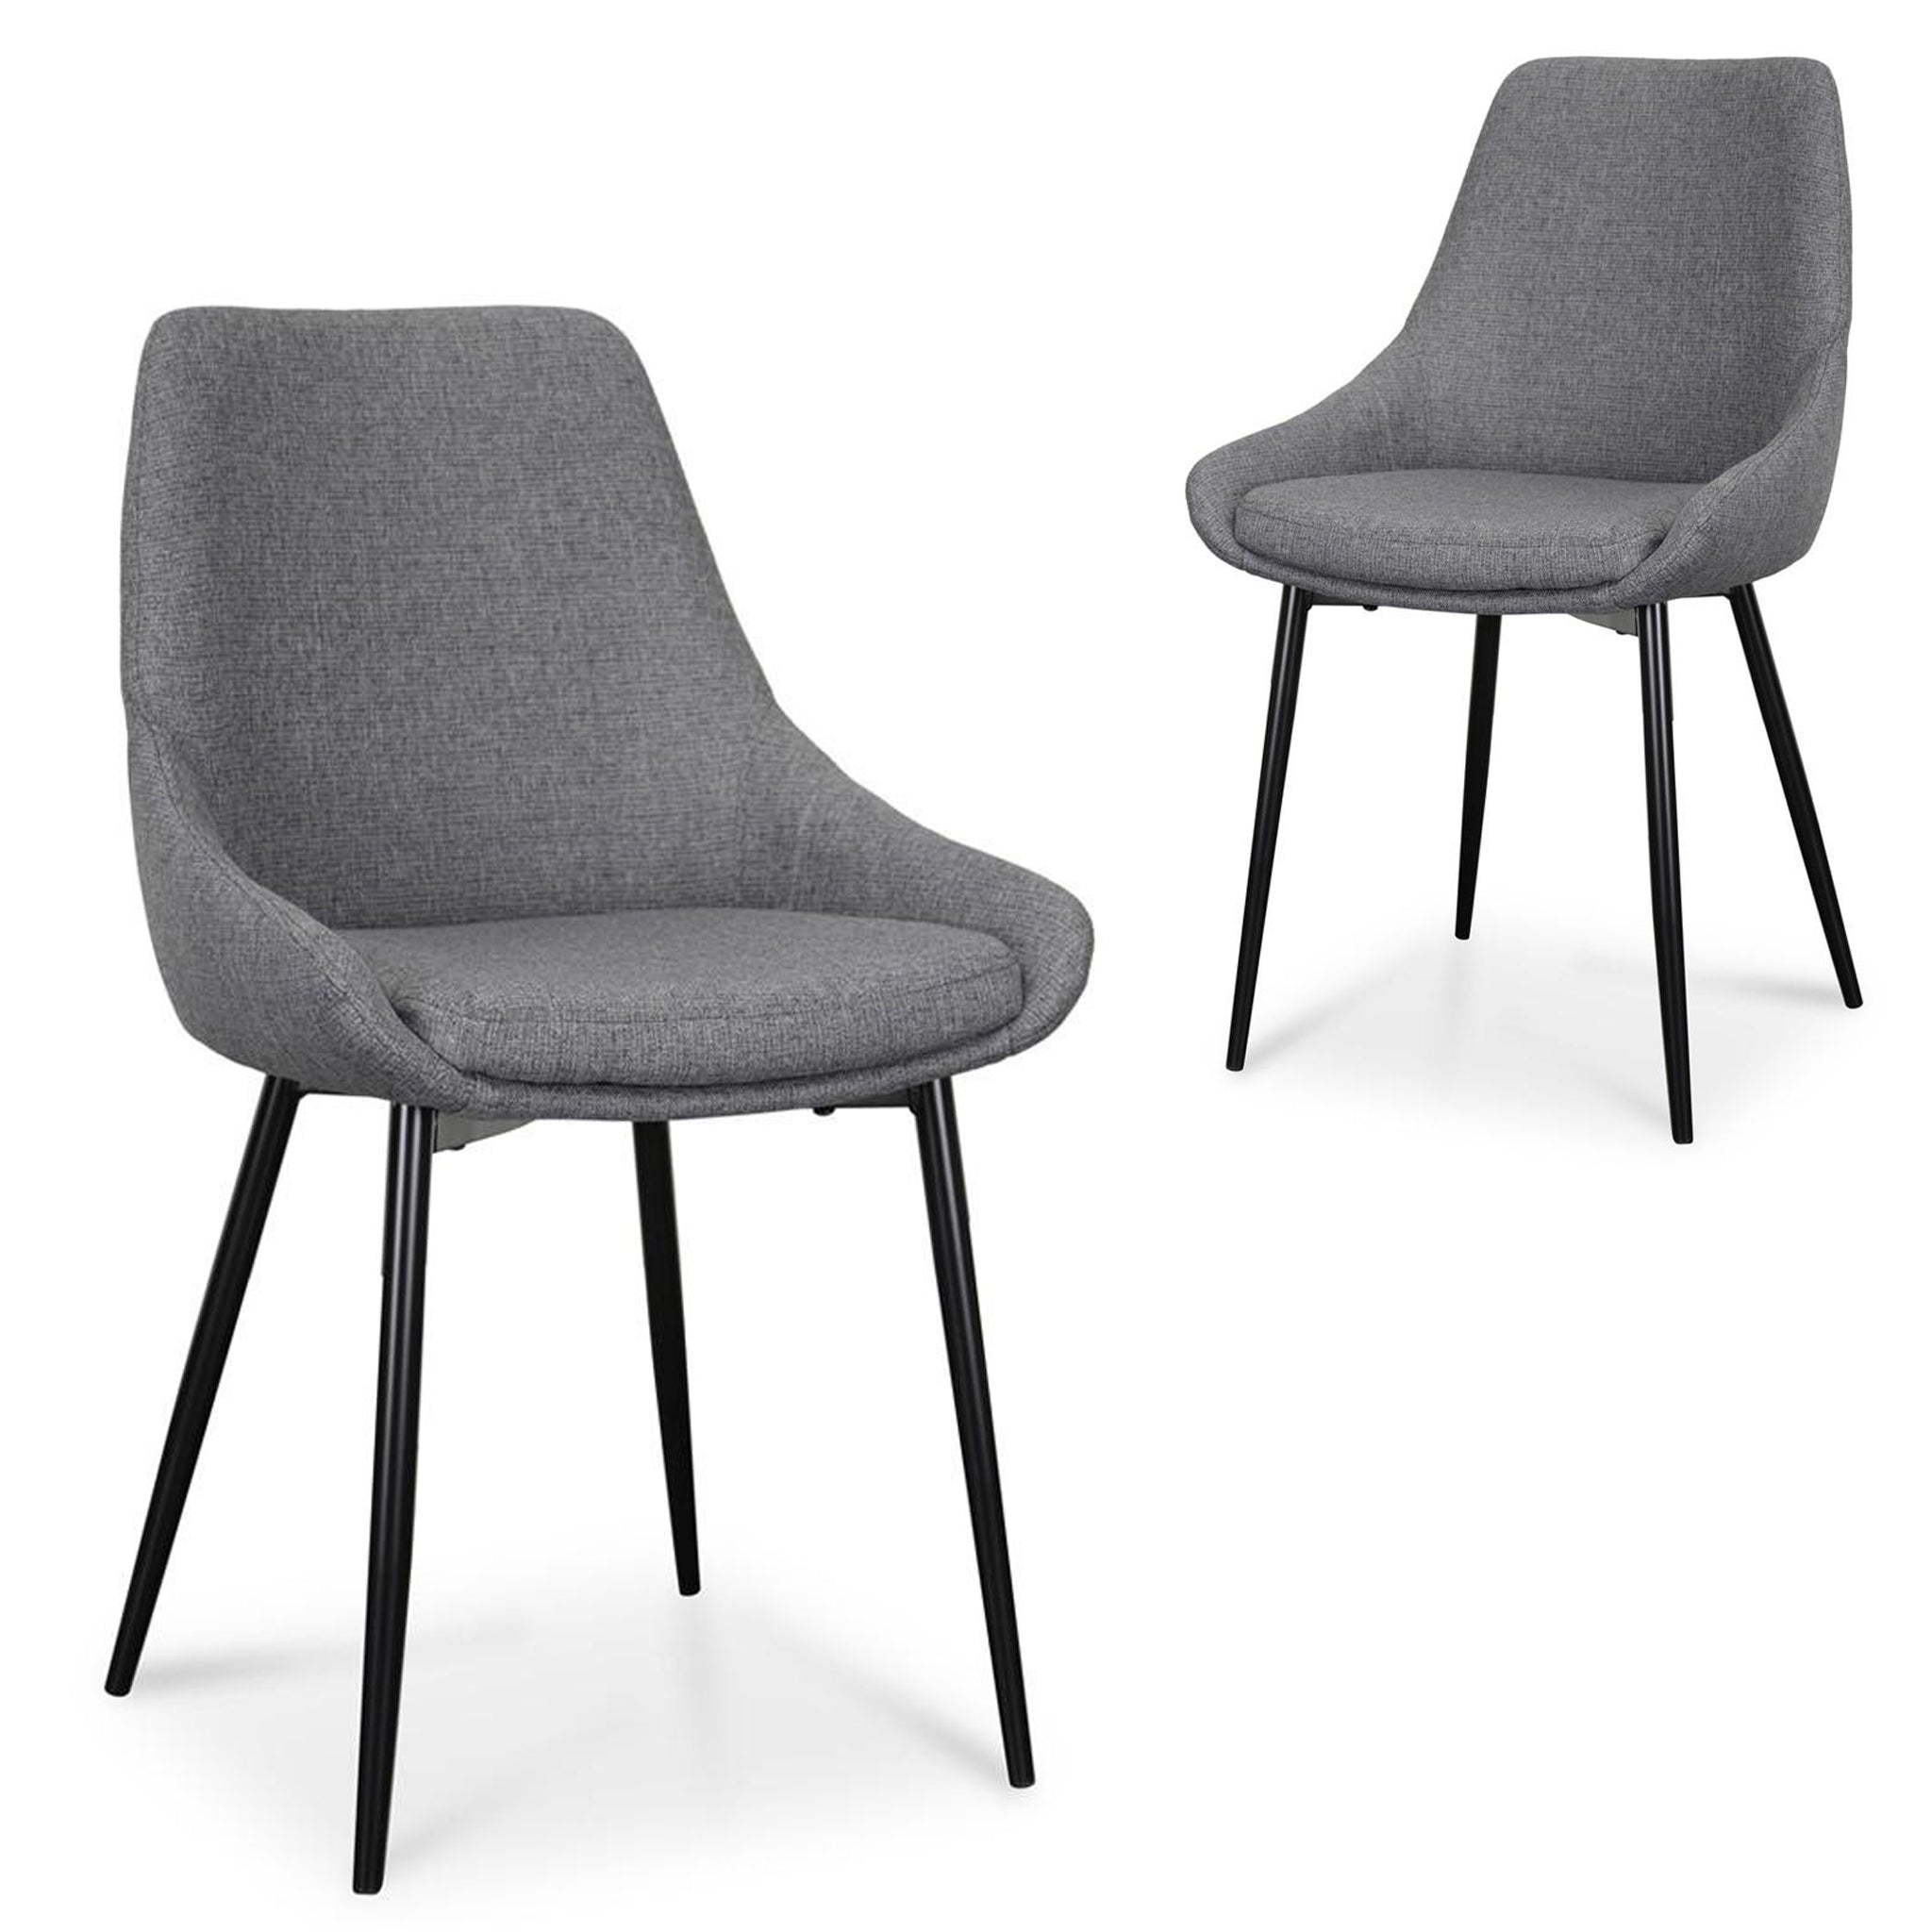 Set of 2 Millie Fabric Dining Chair - Dark Grey - Dining Chairs